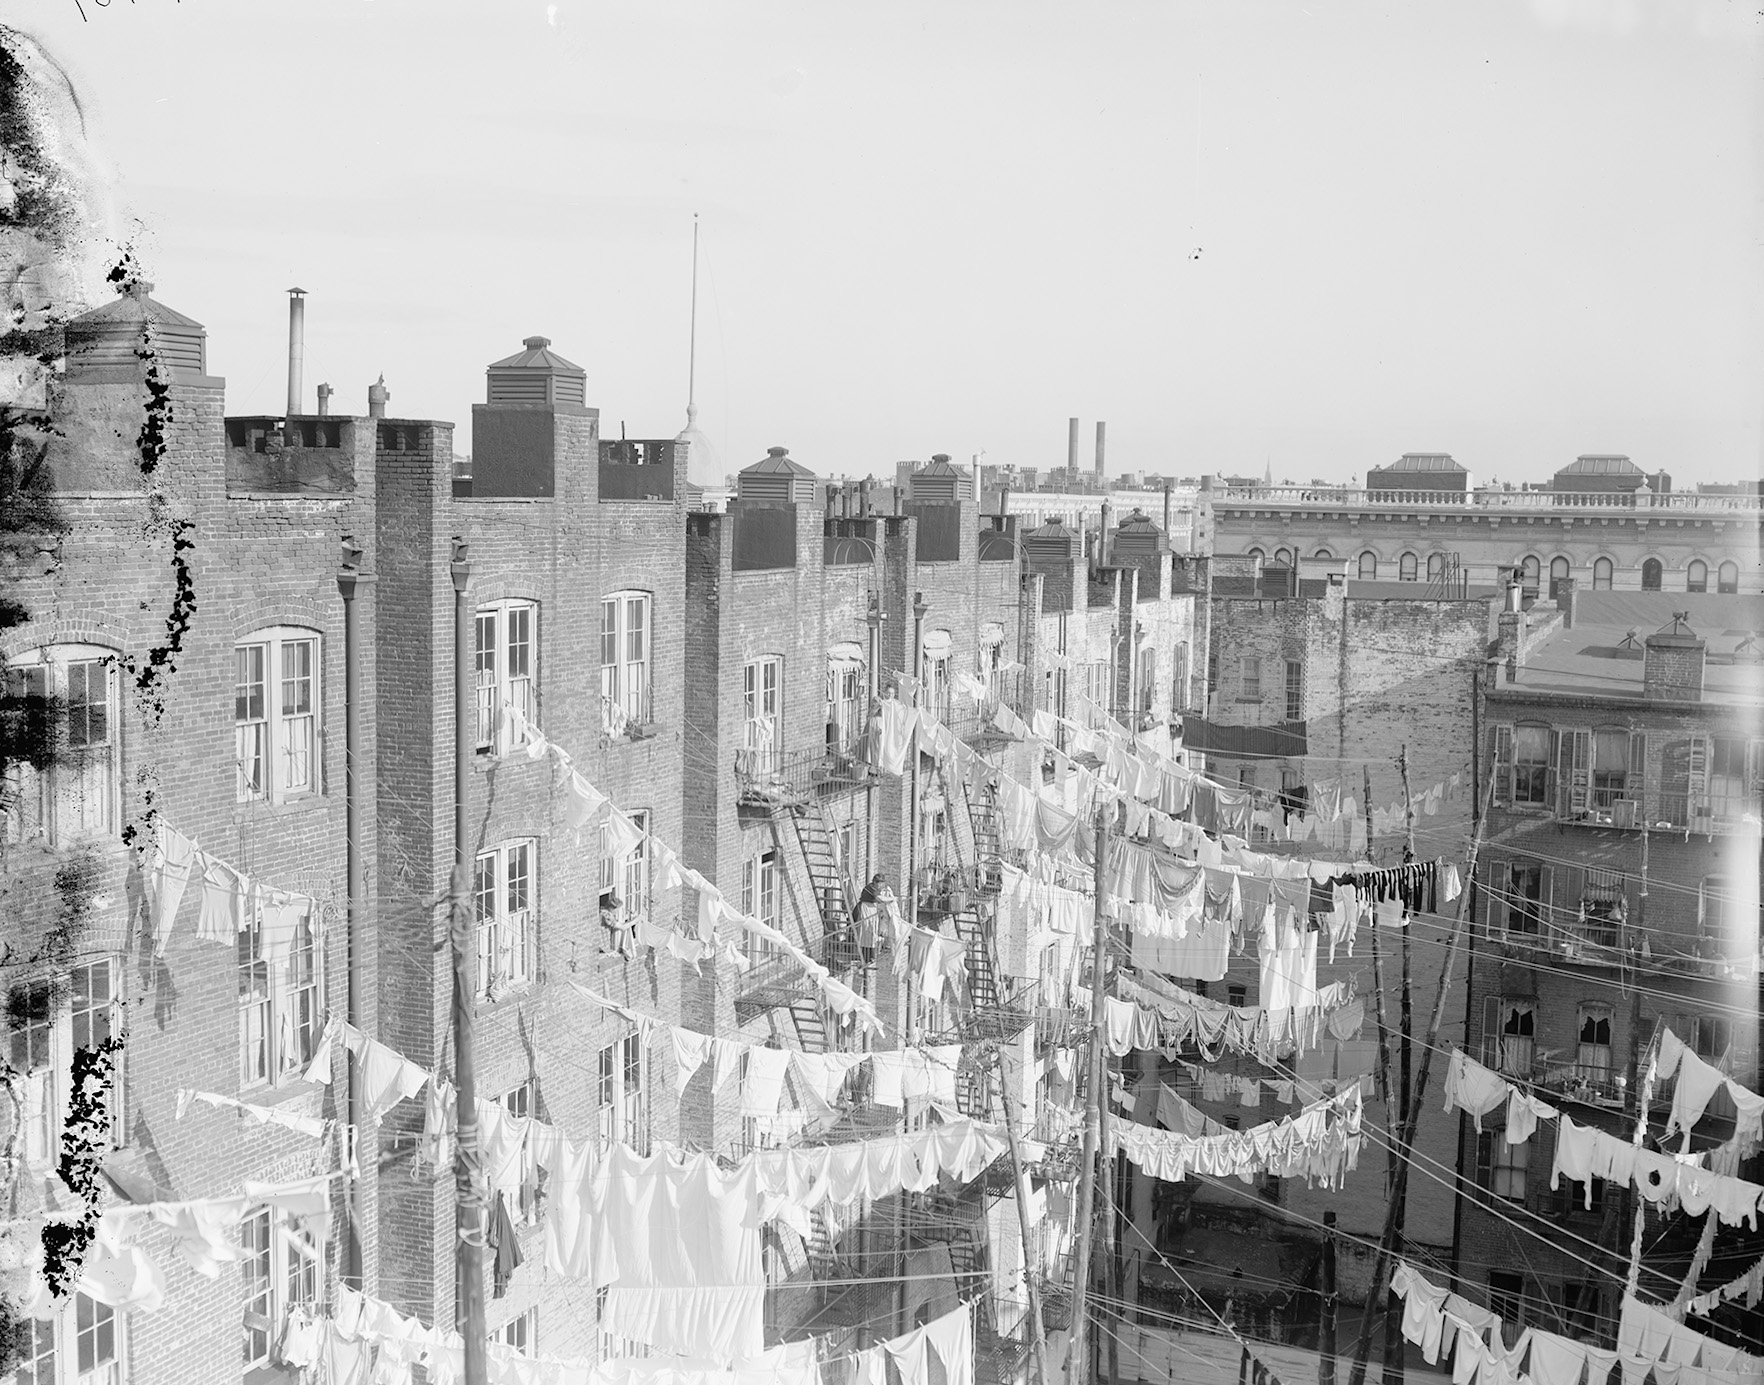 View into the yard of a tenement housing complex in New York. NY.